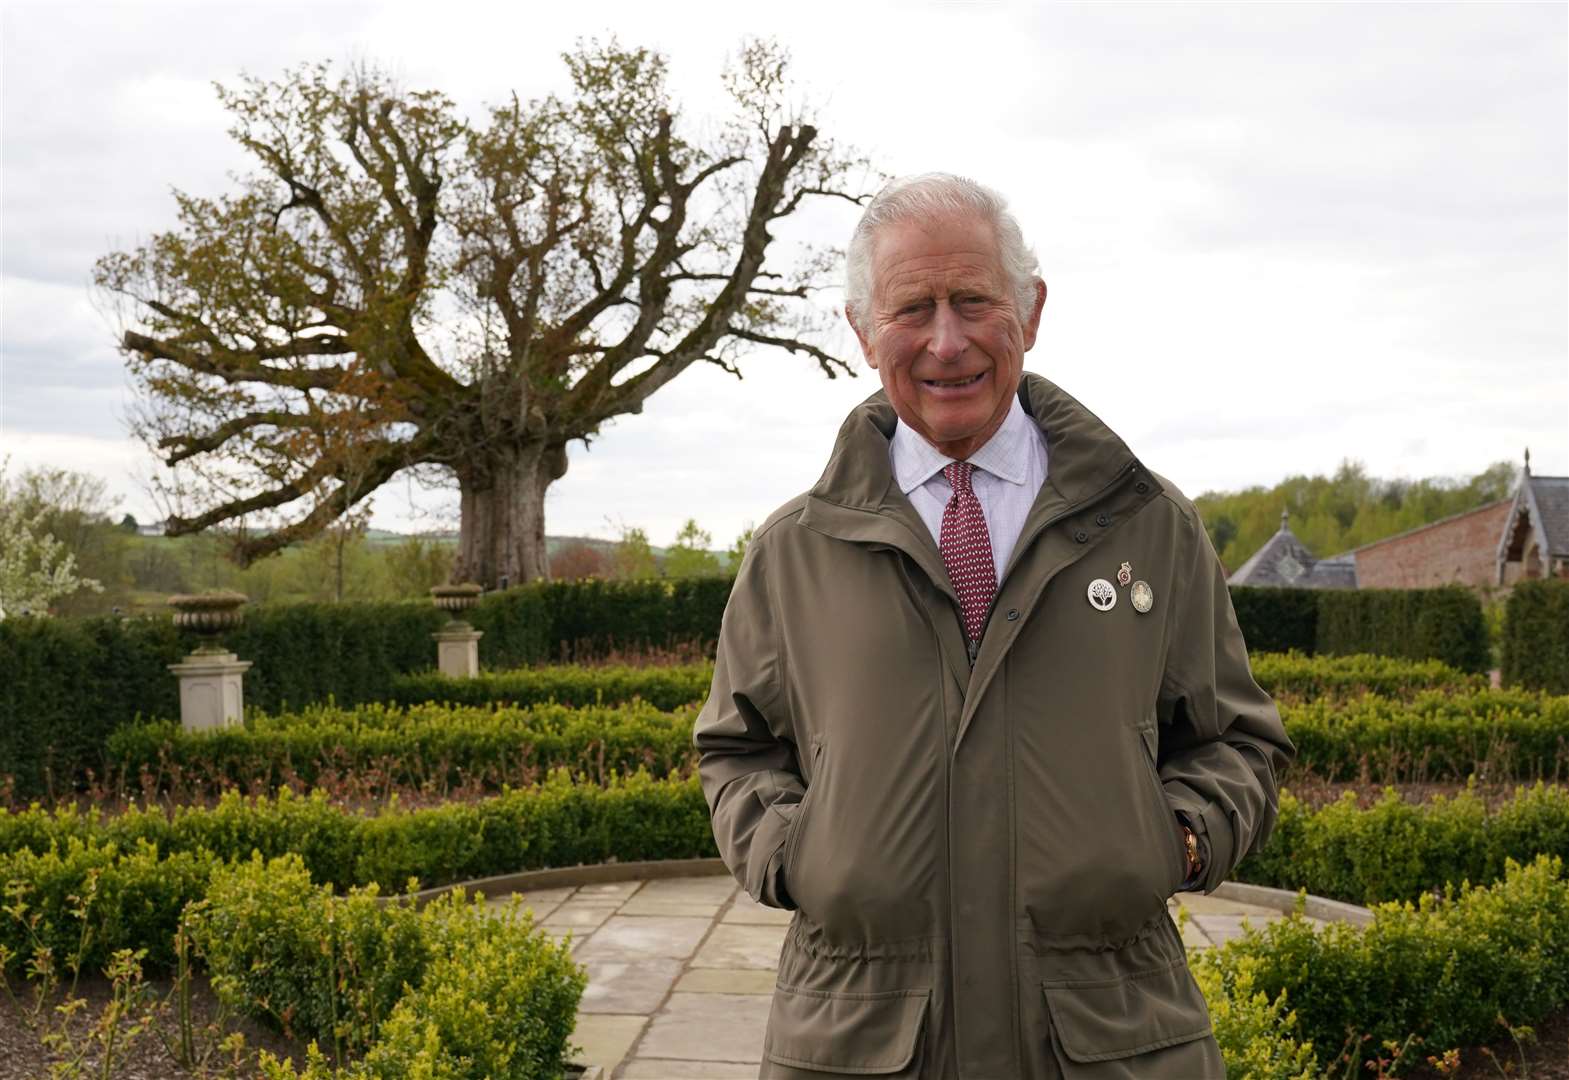 Charles on a previous visit to Dumfries House (Andrew Milligan/PA)